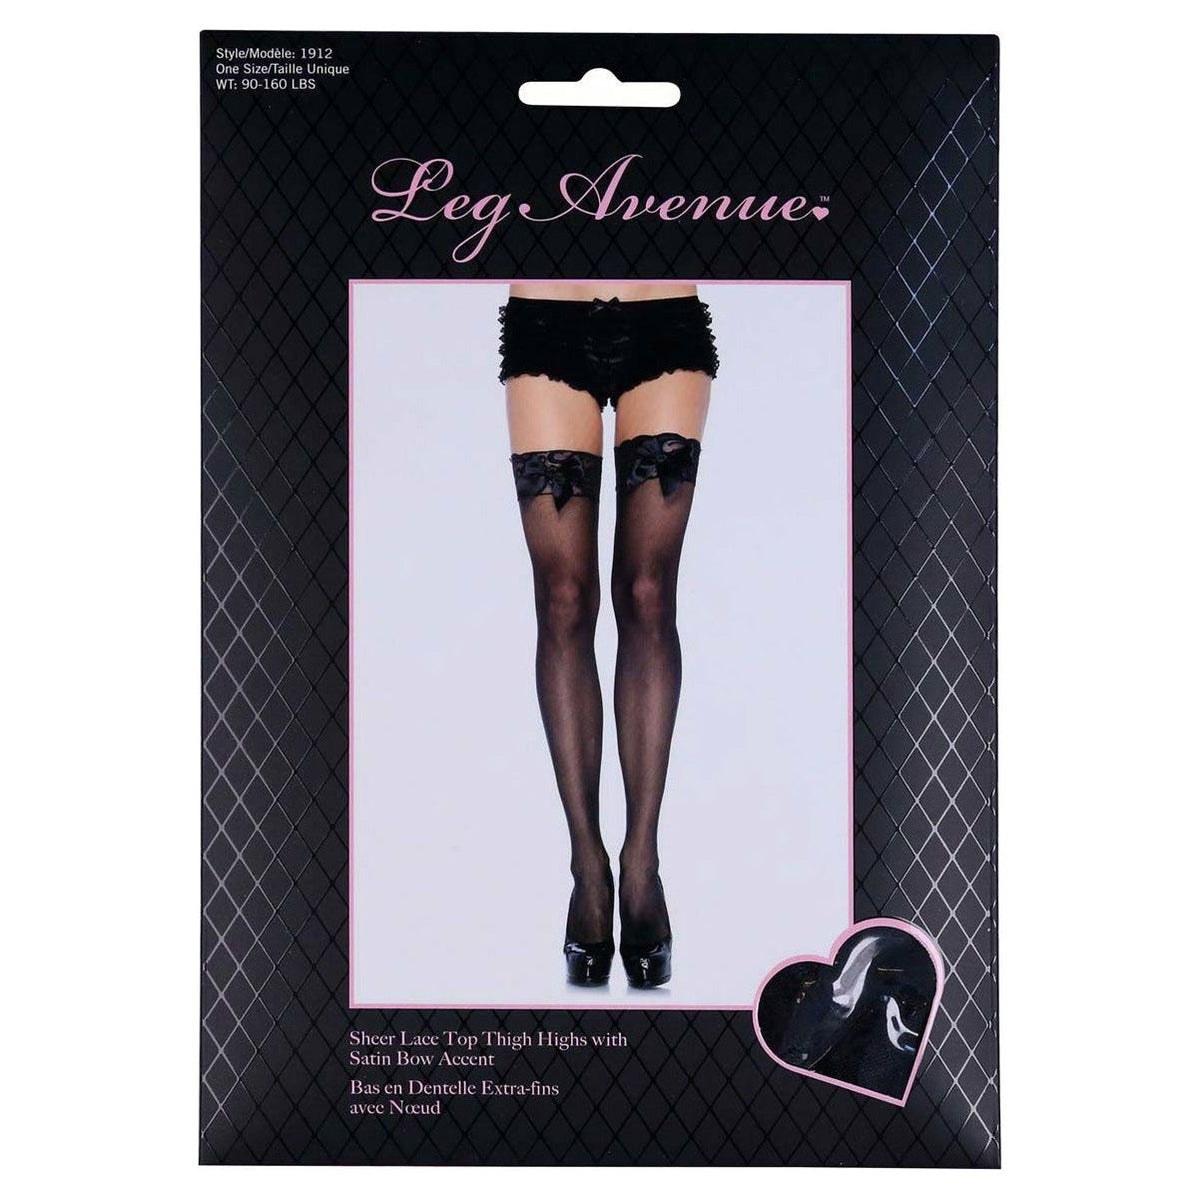 Leg Avenue Sheer Thigh-High Stockings with Satin Bow - Black - One Size